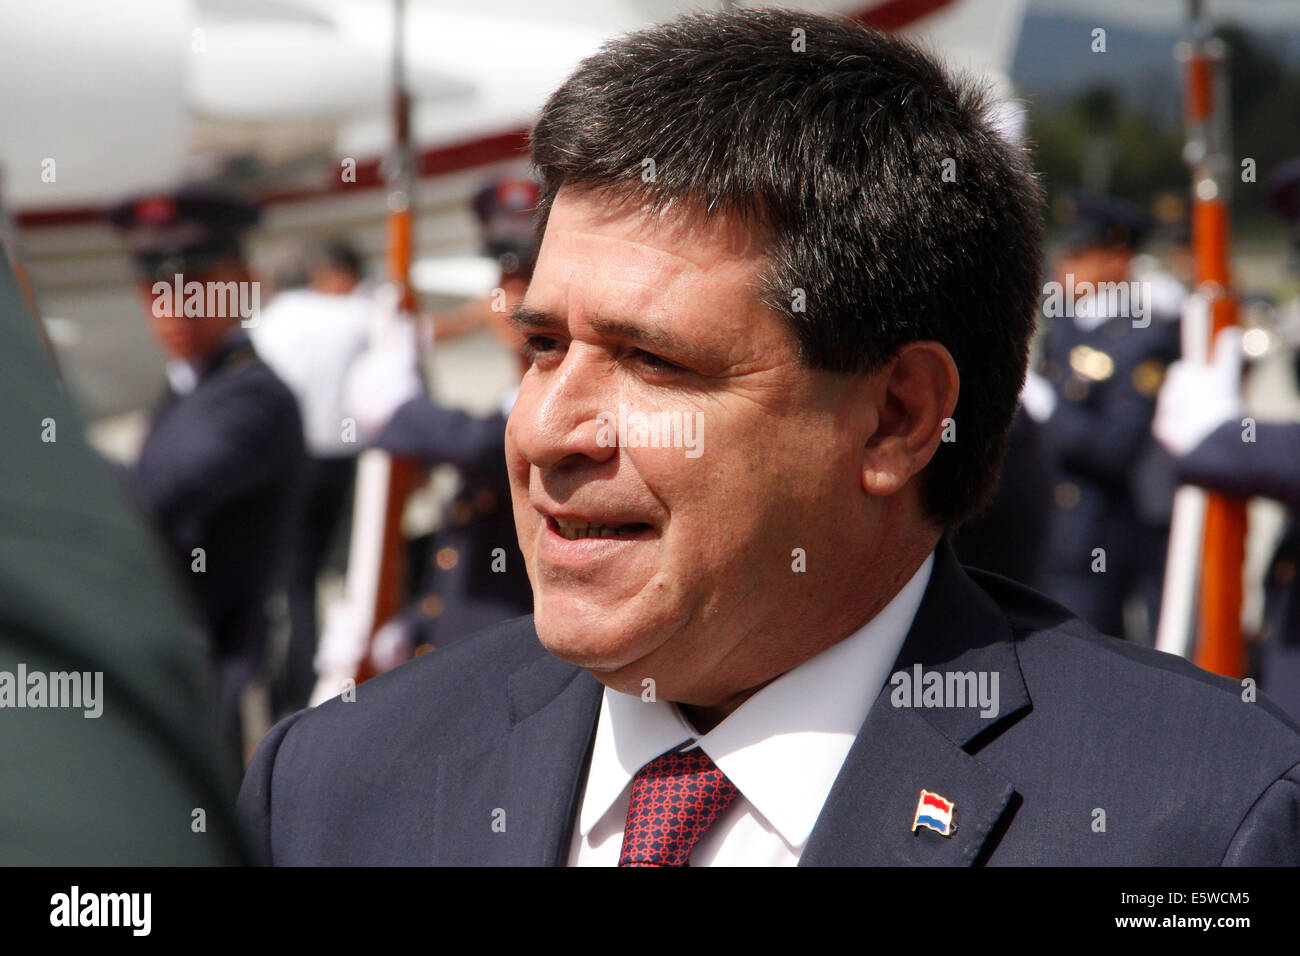 Bogota, Colombia. 6th Aug, 2014. Paraguay´s President Horacio Cartes during his arrival in Bogota on August 6 at the Military Airport CATAM in Bogotá. The President will attend the inauguration of his Colombian counterpart Juan Manuel Santos on Thursday a new beginning of President Santos' period of Government (2014-2018). Credit:  César Mariño García/Pacific Press/Alamy Live News Stock Photo